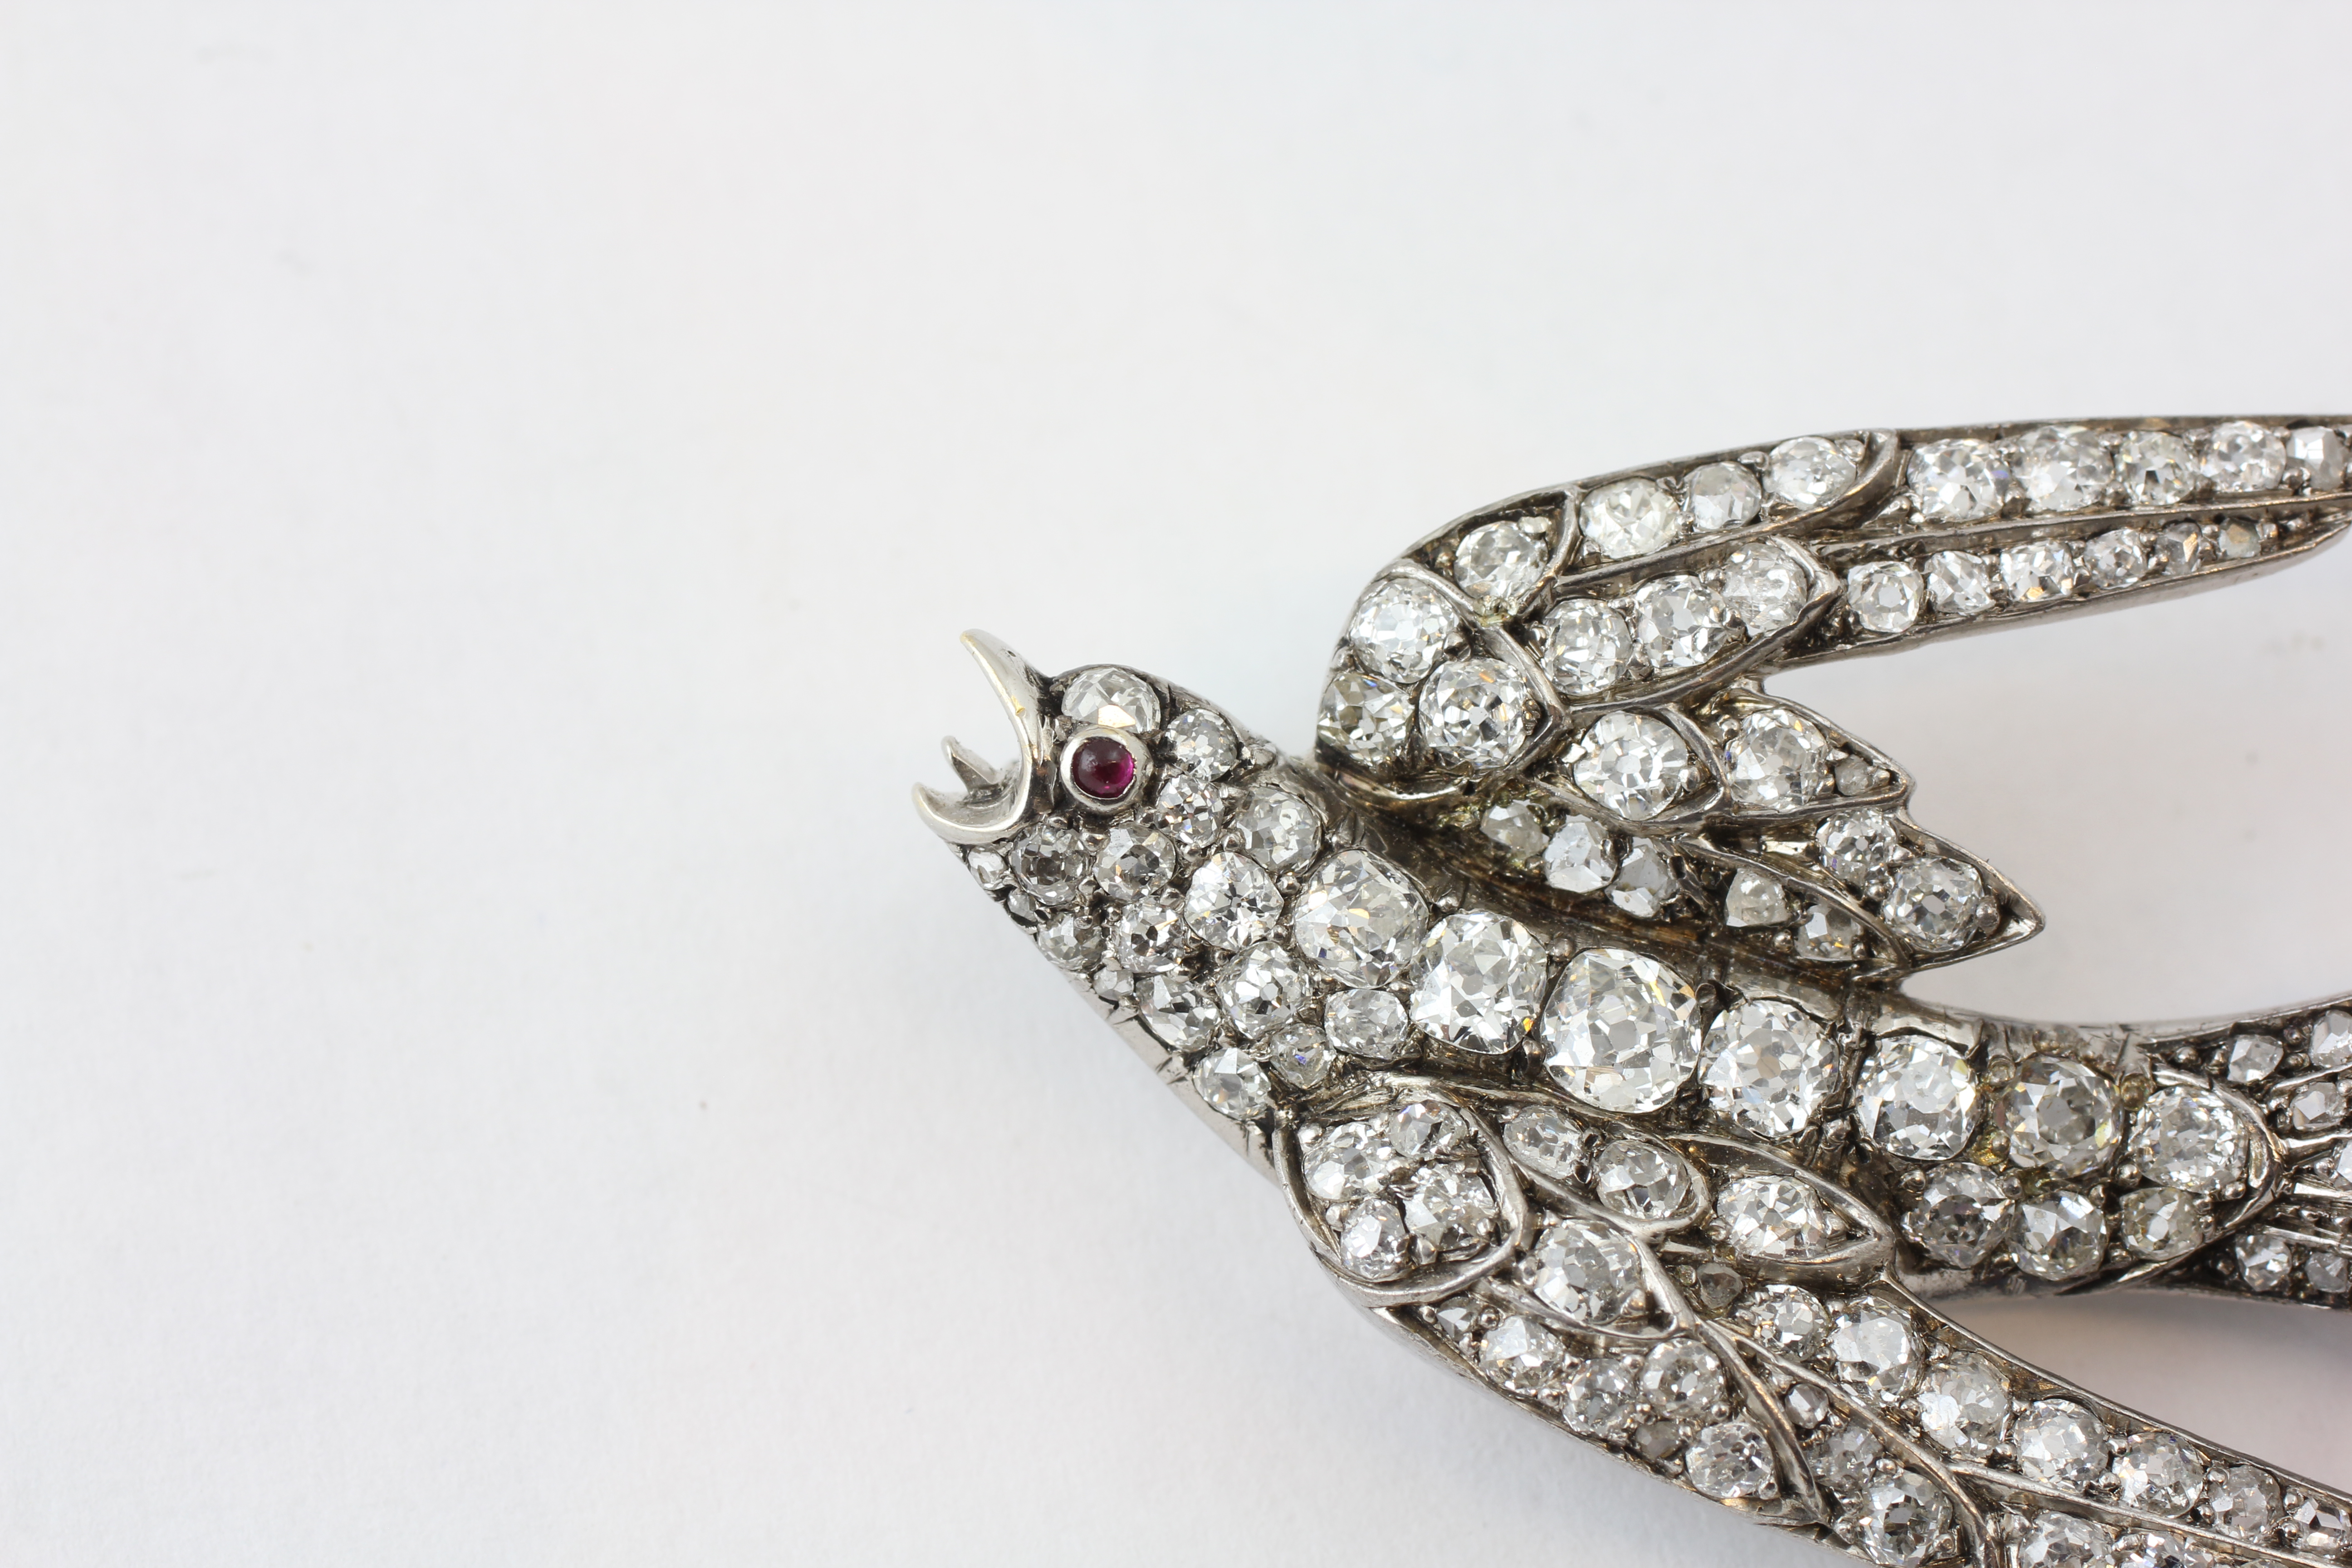 A DIAMOND SWALLOW BROOCH, THE EYE SET WITH A RUBY, LENGTH 58MM, THE LARGEST DIAMOND BEING 3MM, - Image 2 of 5